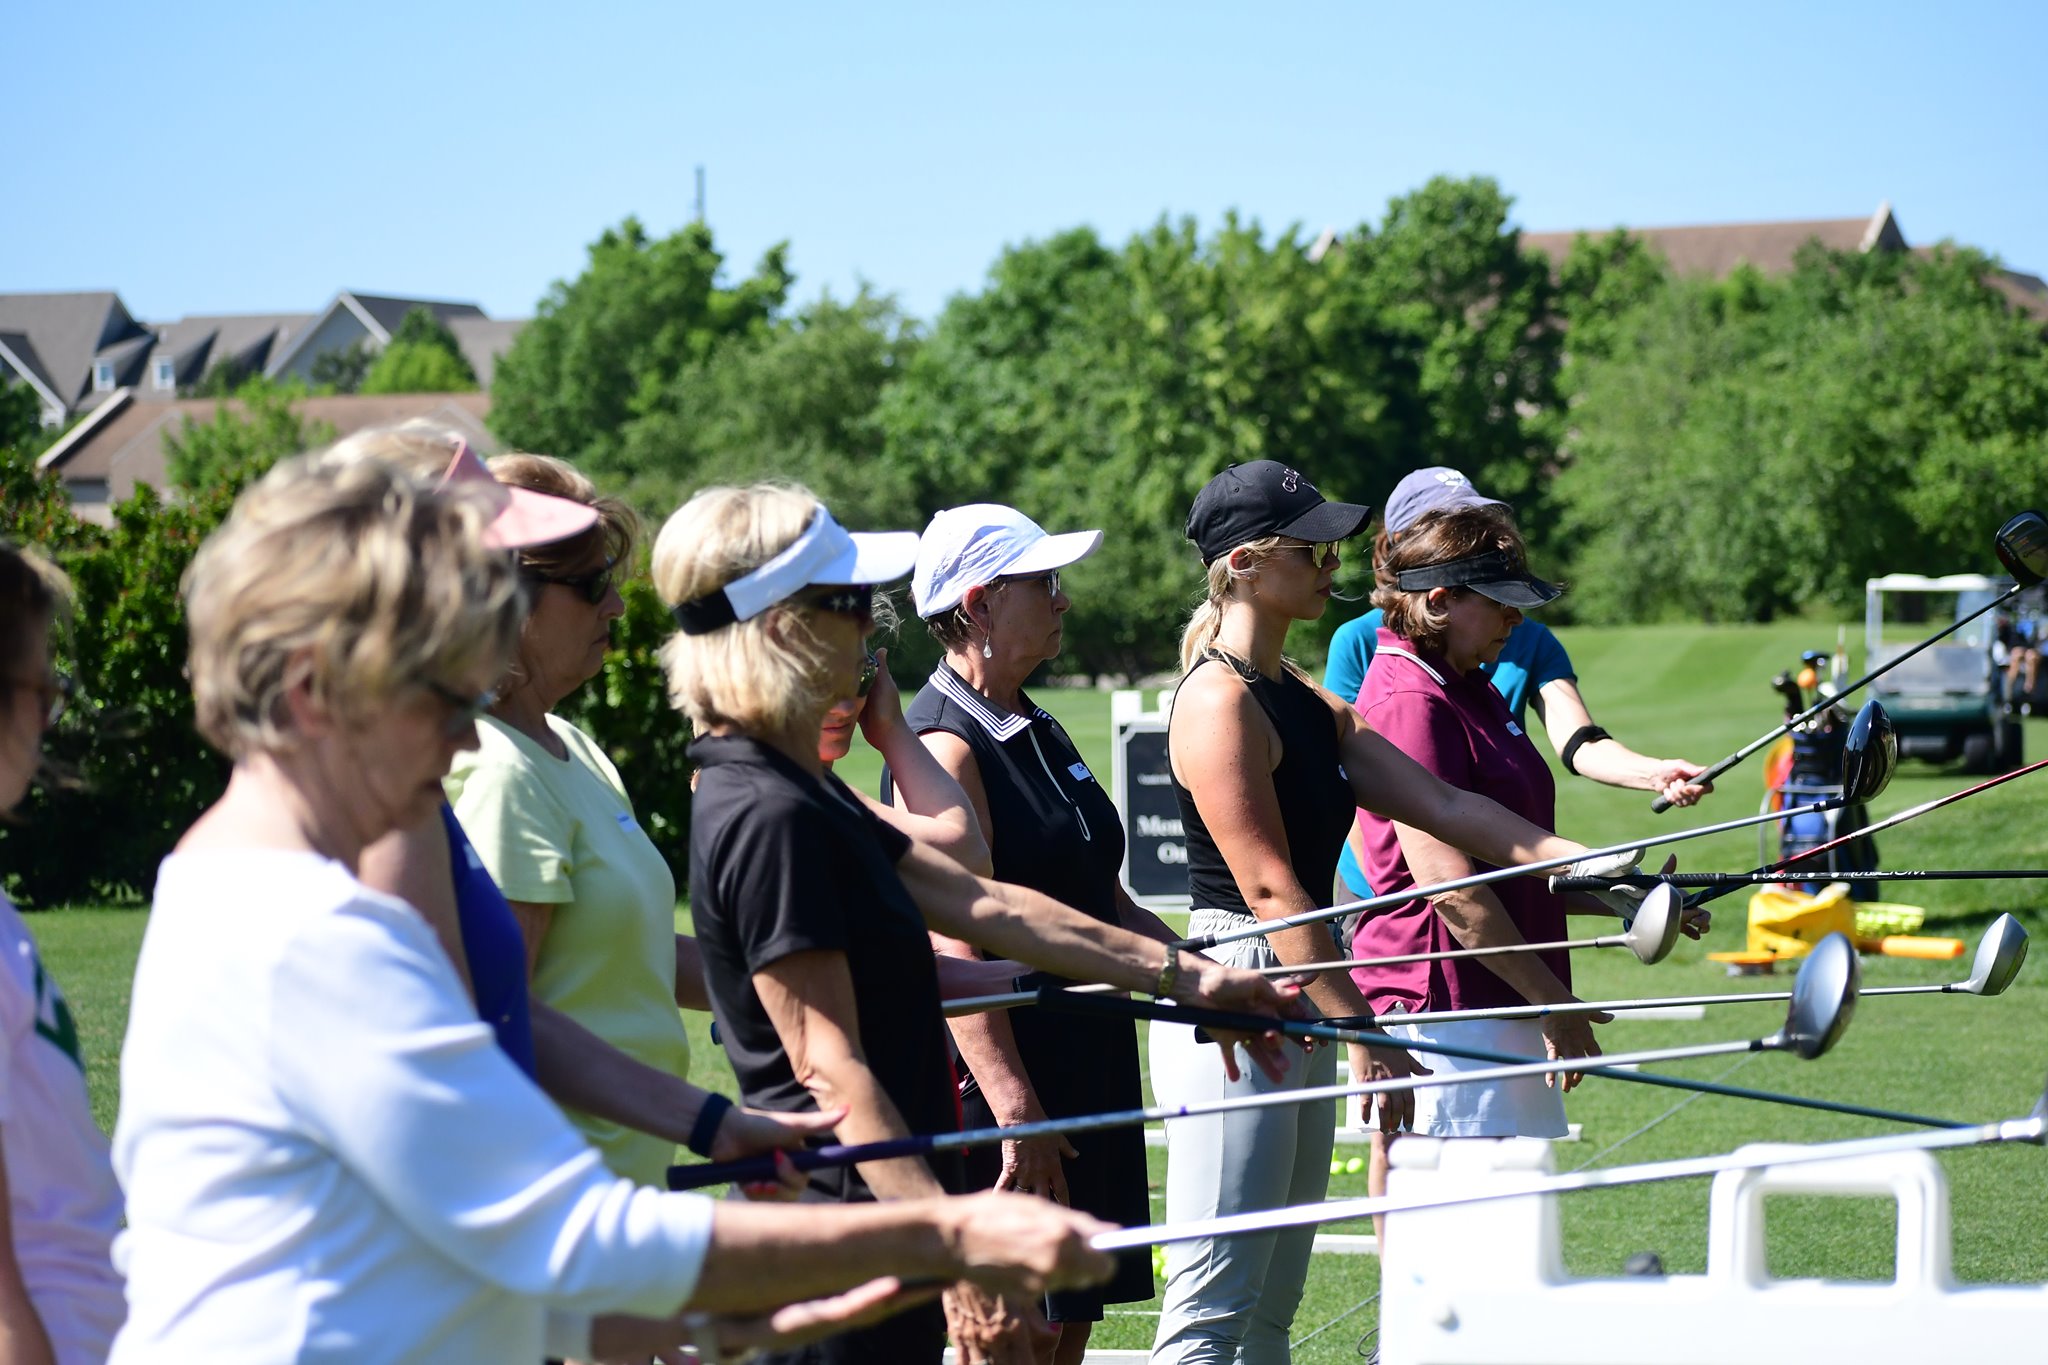 Ladies golf programs hosted by the Tennessee Golf Foundation